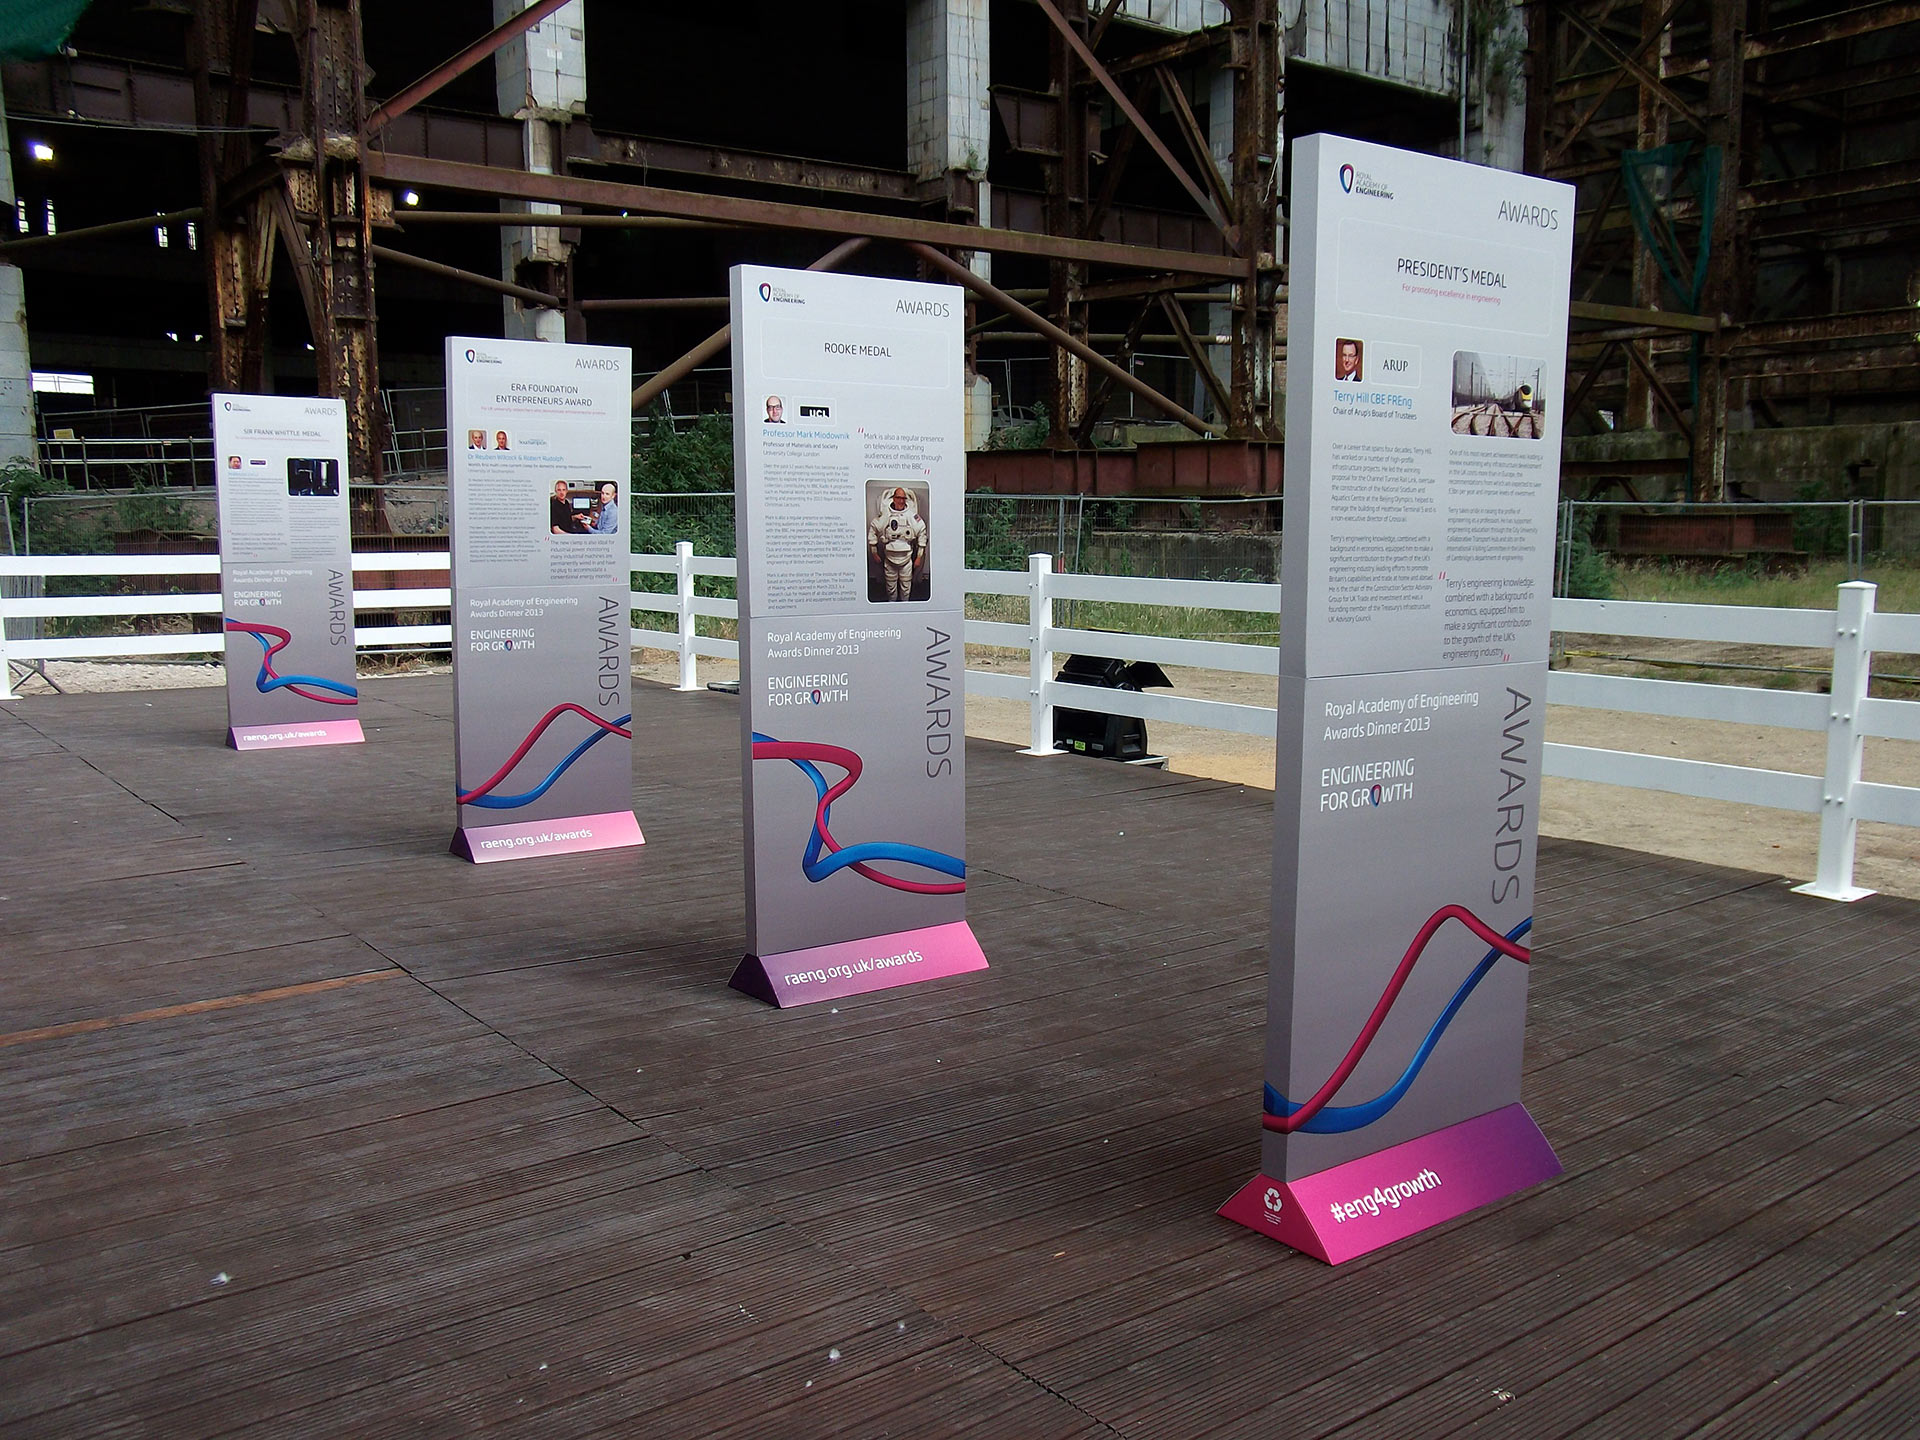 We designed and supplied a range of innovative, recyclable cardboard displays for the event.